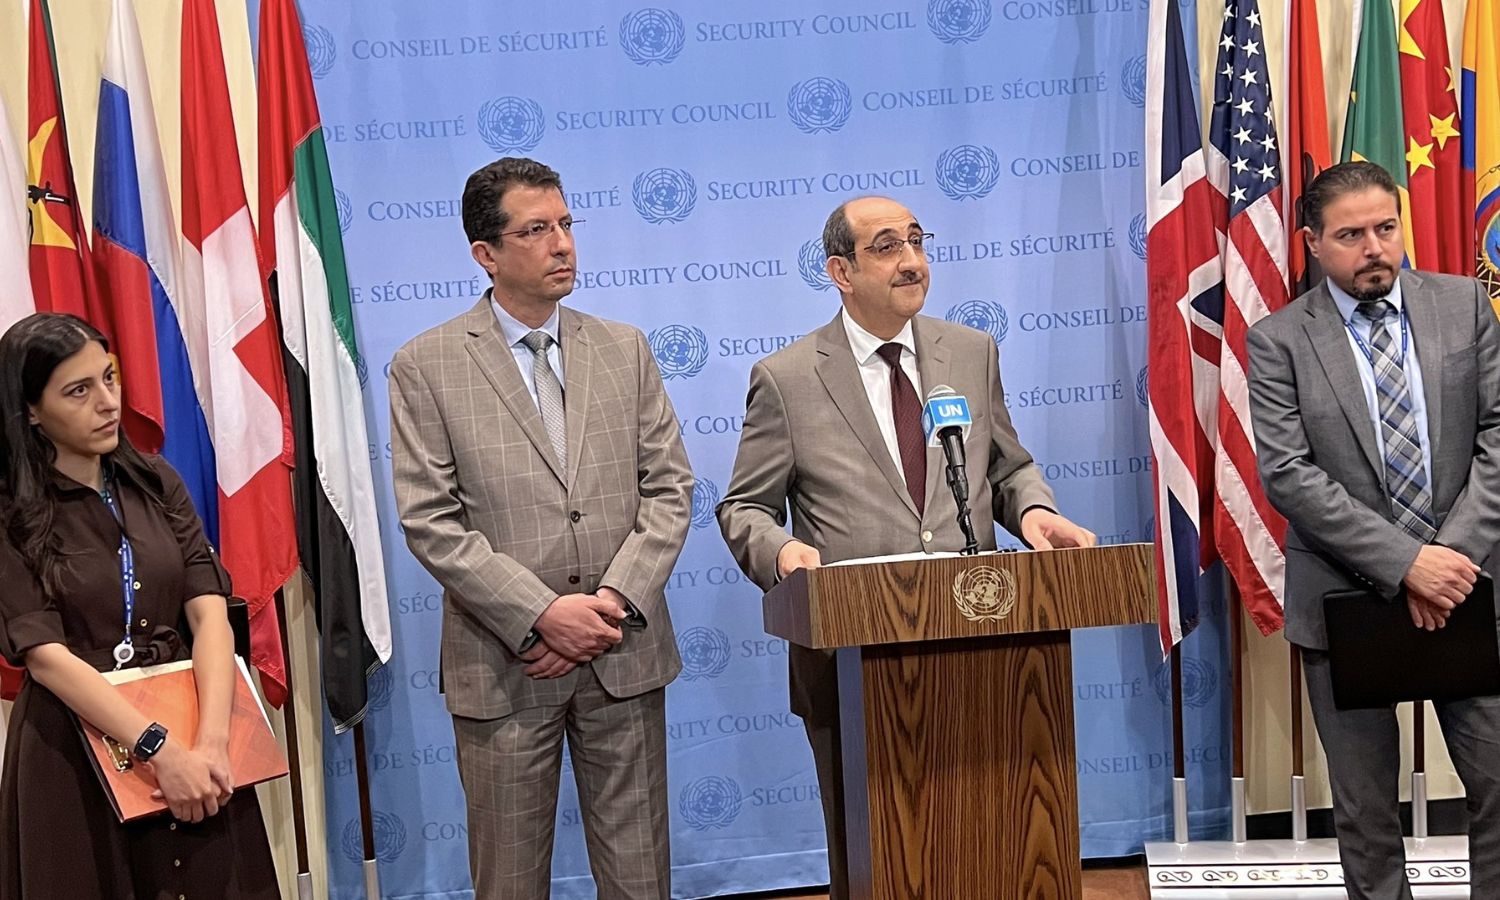 The regime’s Representative to the United Nations, Bassam Sabbagh, during a press conference after the failure to renew the UN mandate for cross-border aid - July 13 (Twitter/Bassam Sabbagh)